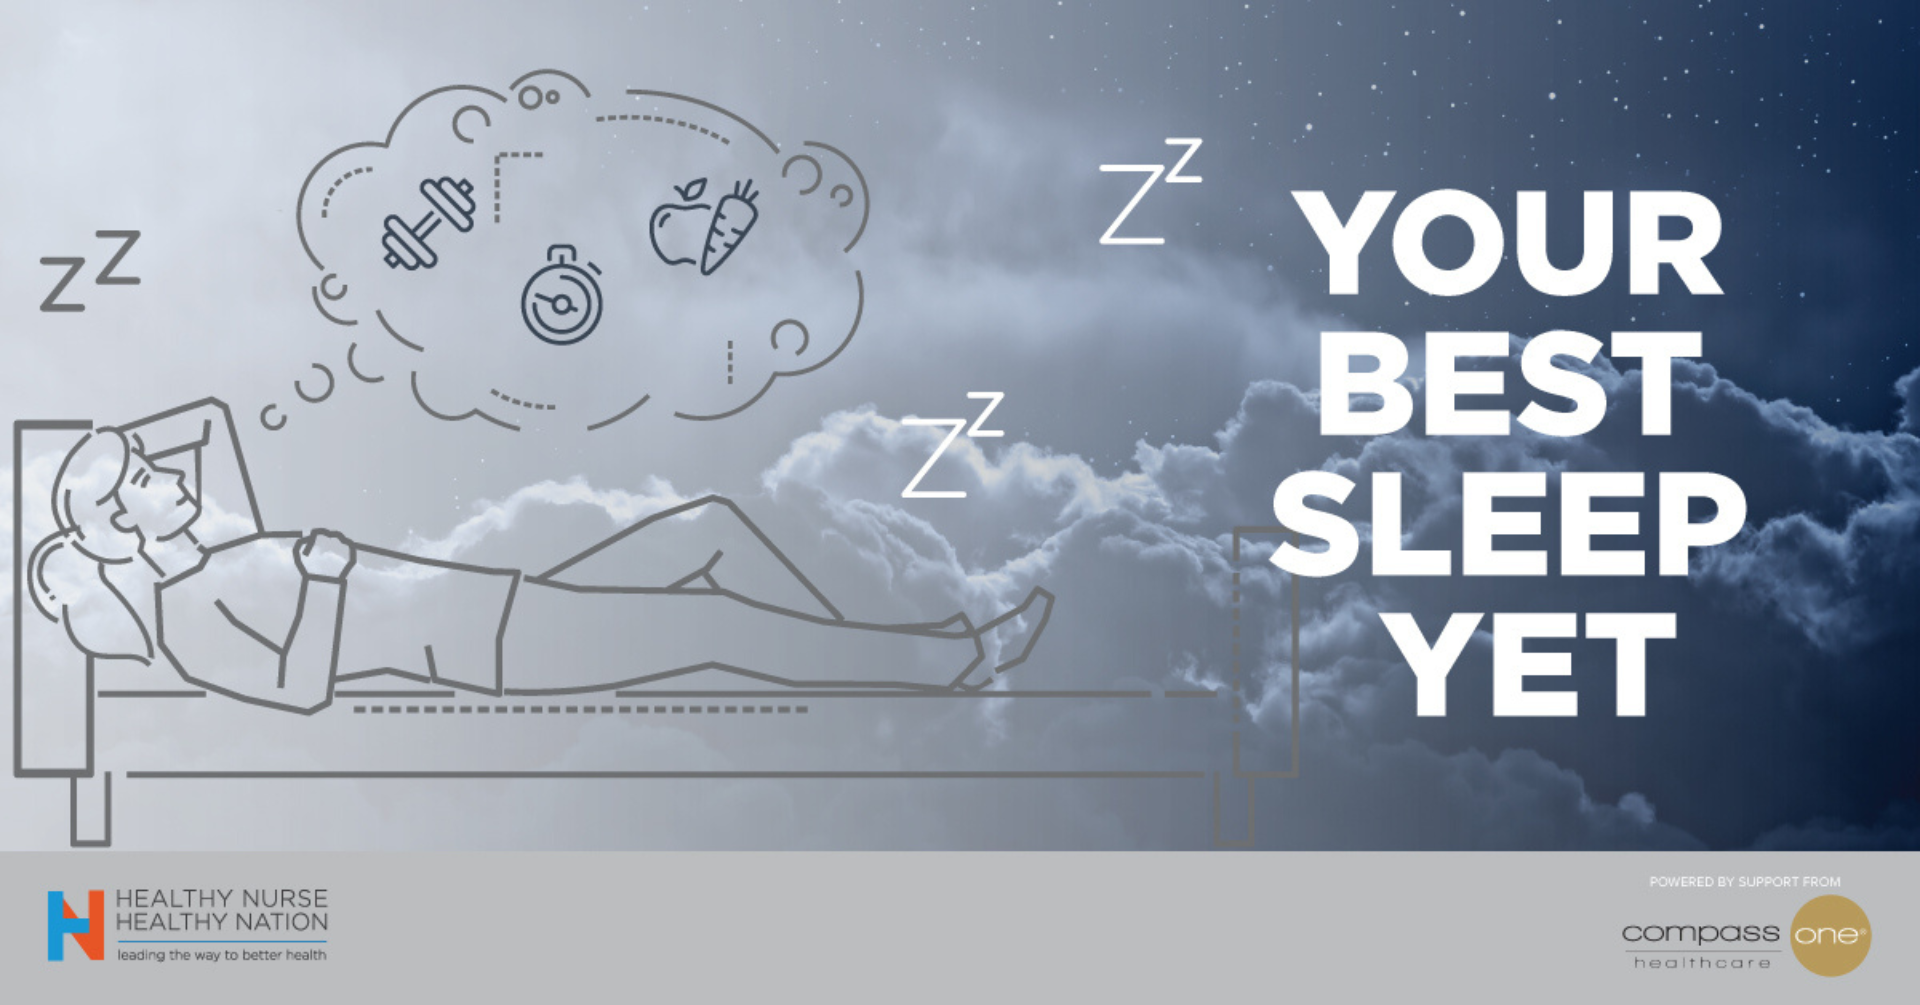 Your Best Sleep Yet challenge, powered by CompassOne Healthcare 46